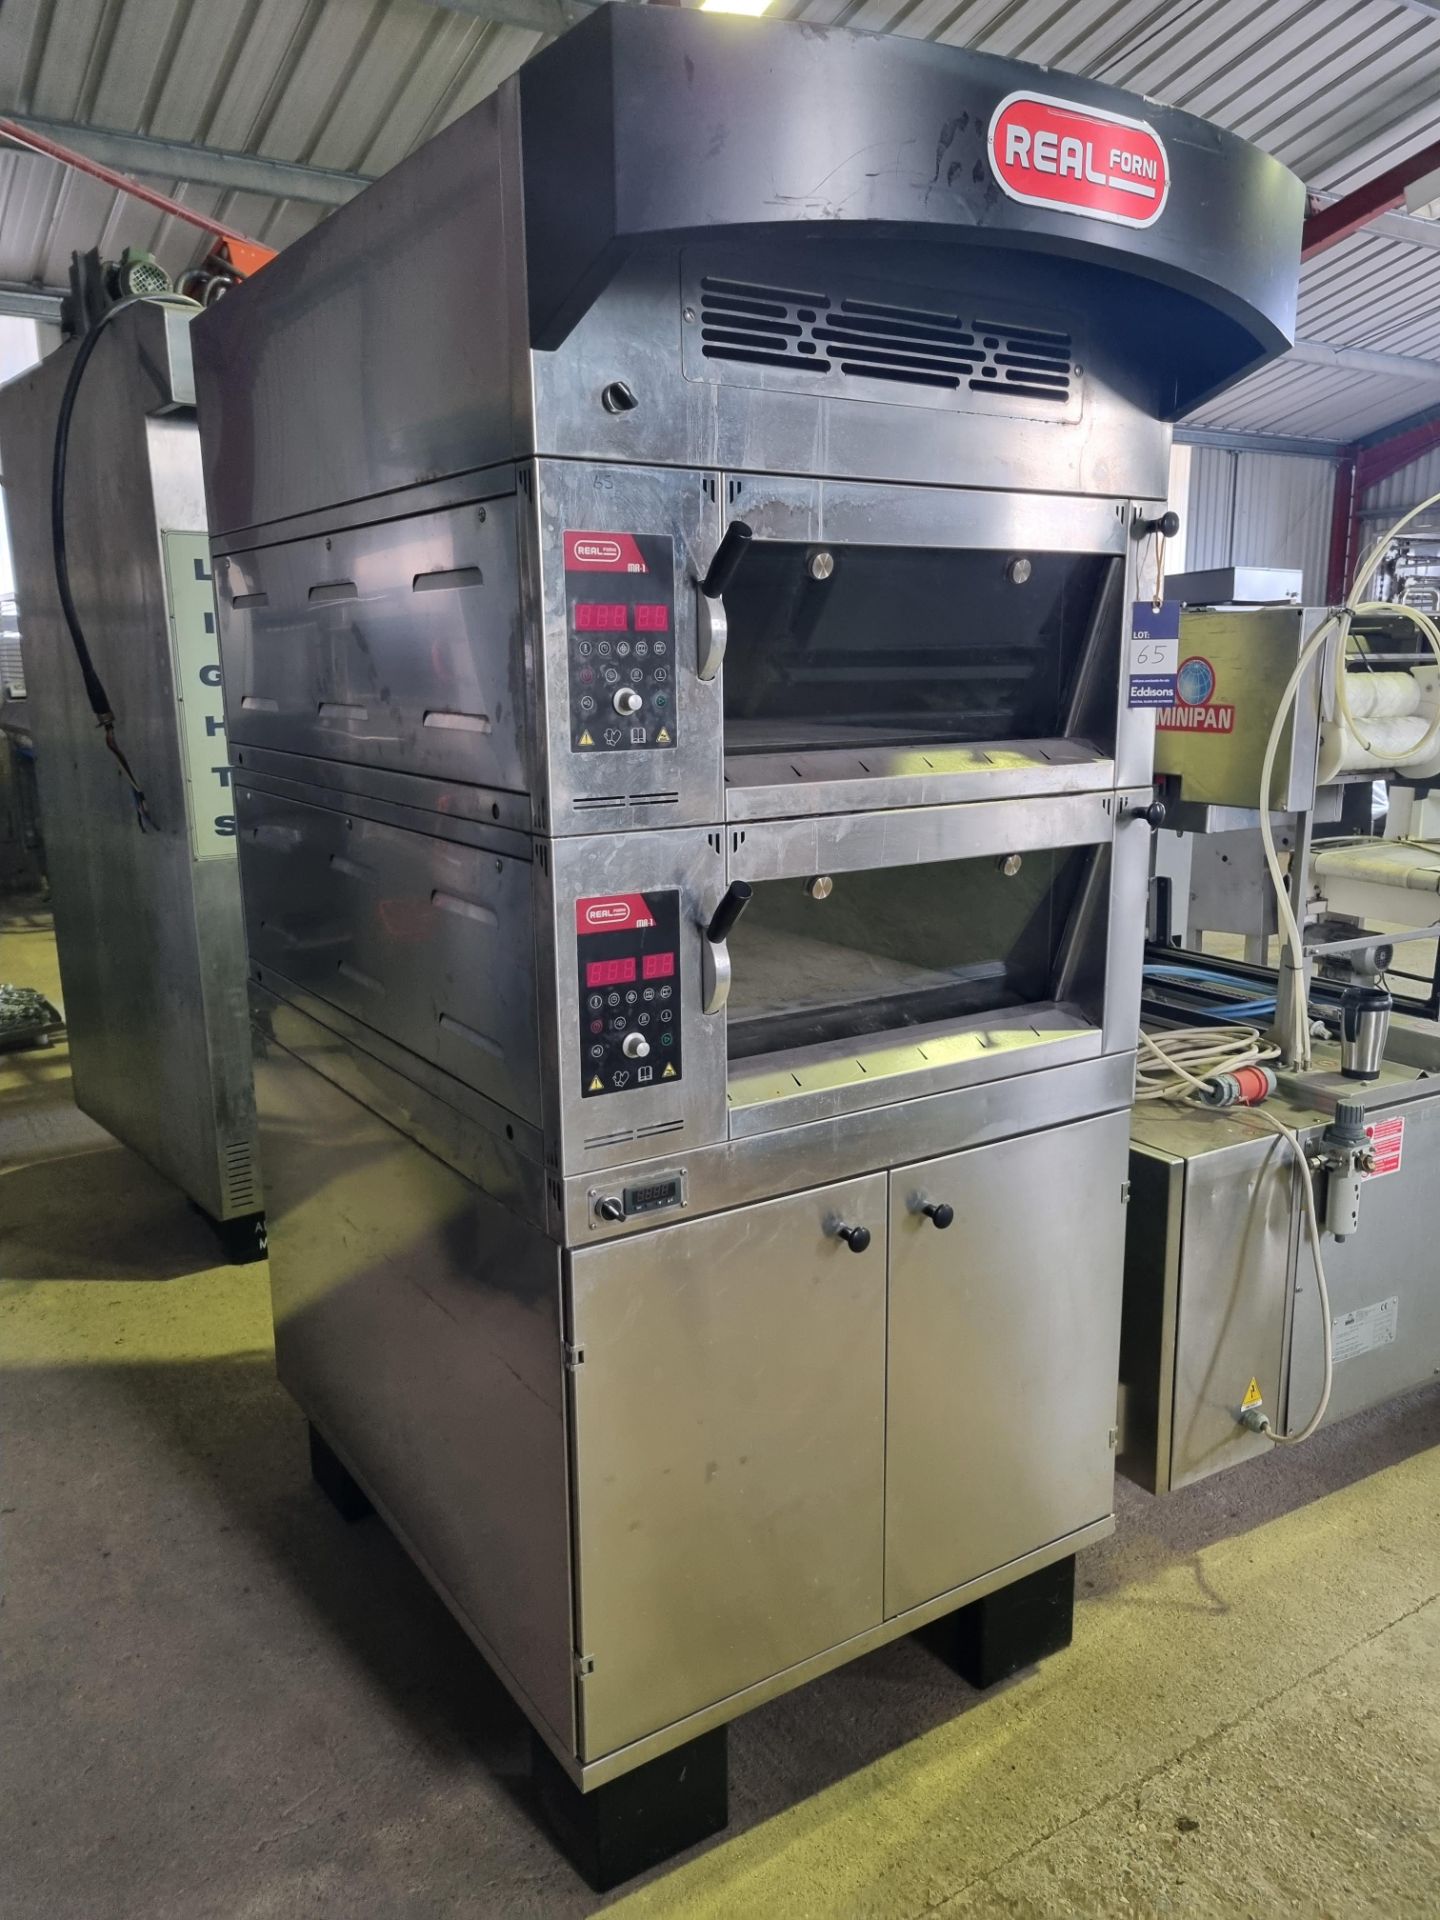 2015 Real Forni Electric Model LS85 MR-1 Oven. Twin door cooling cabinet below. 600 x 800 x 200 mm - Image 4 of 8